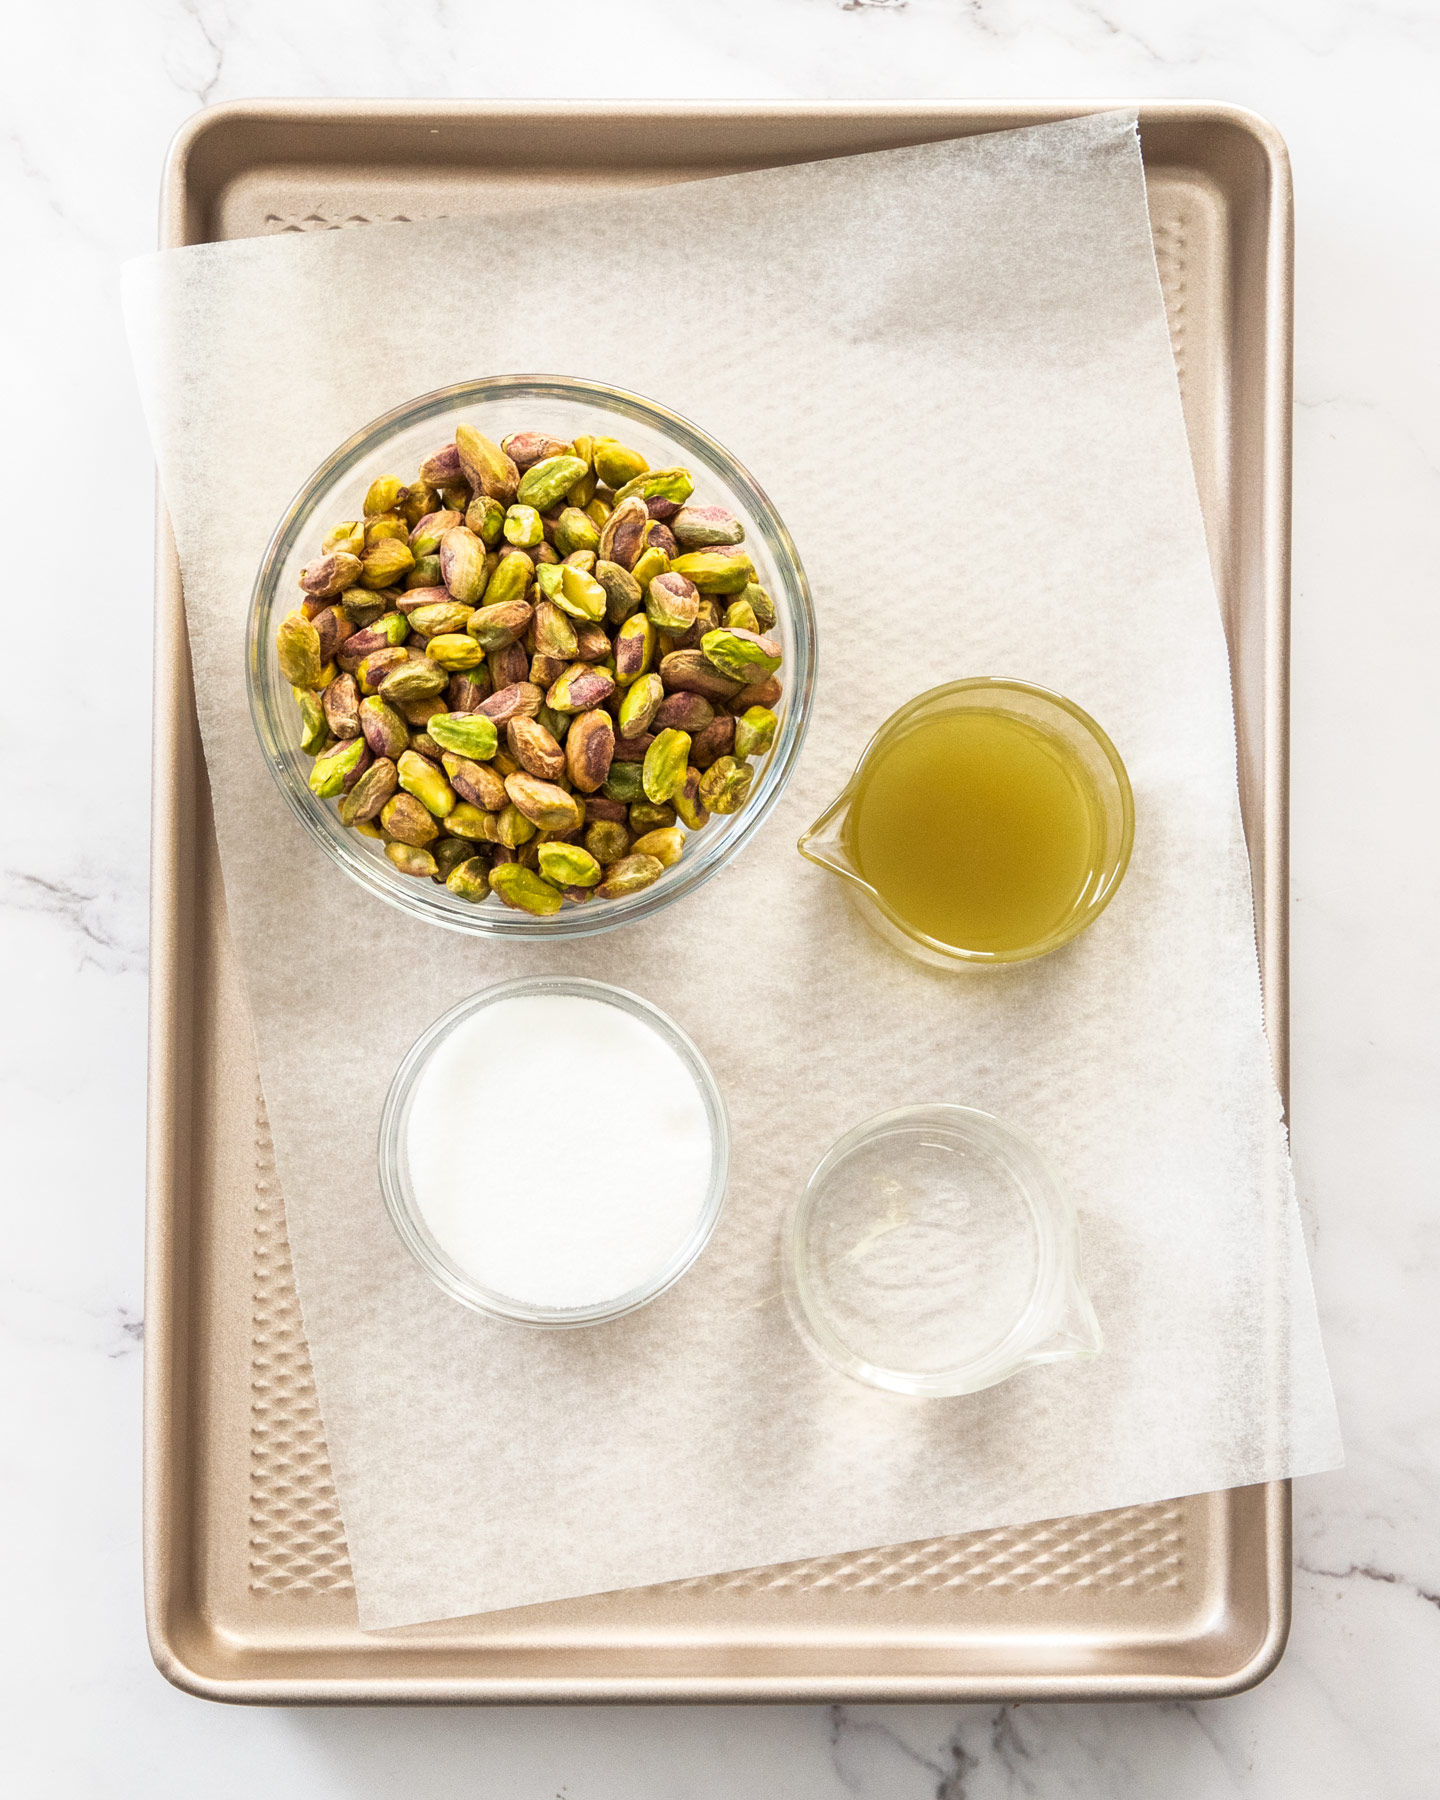 Ingredients for pistachio paste on a baking tray.